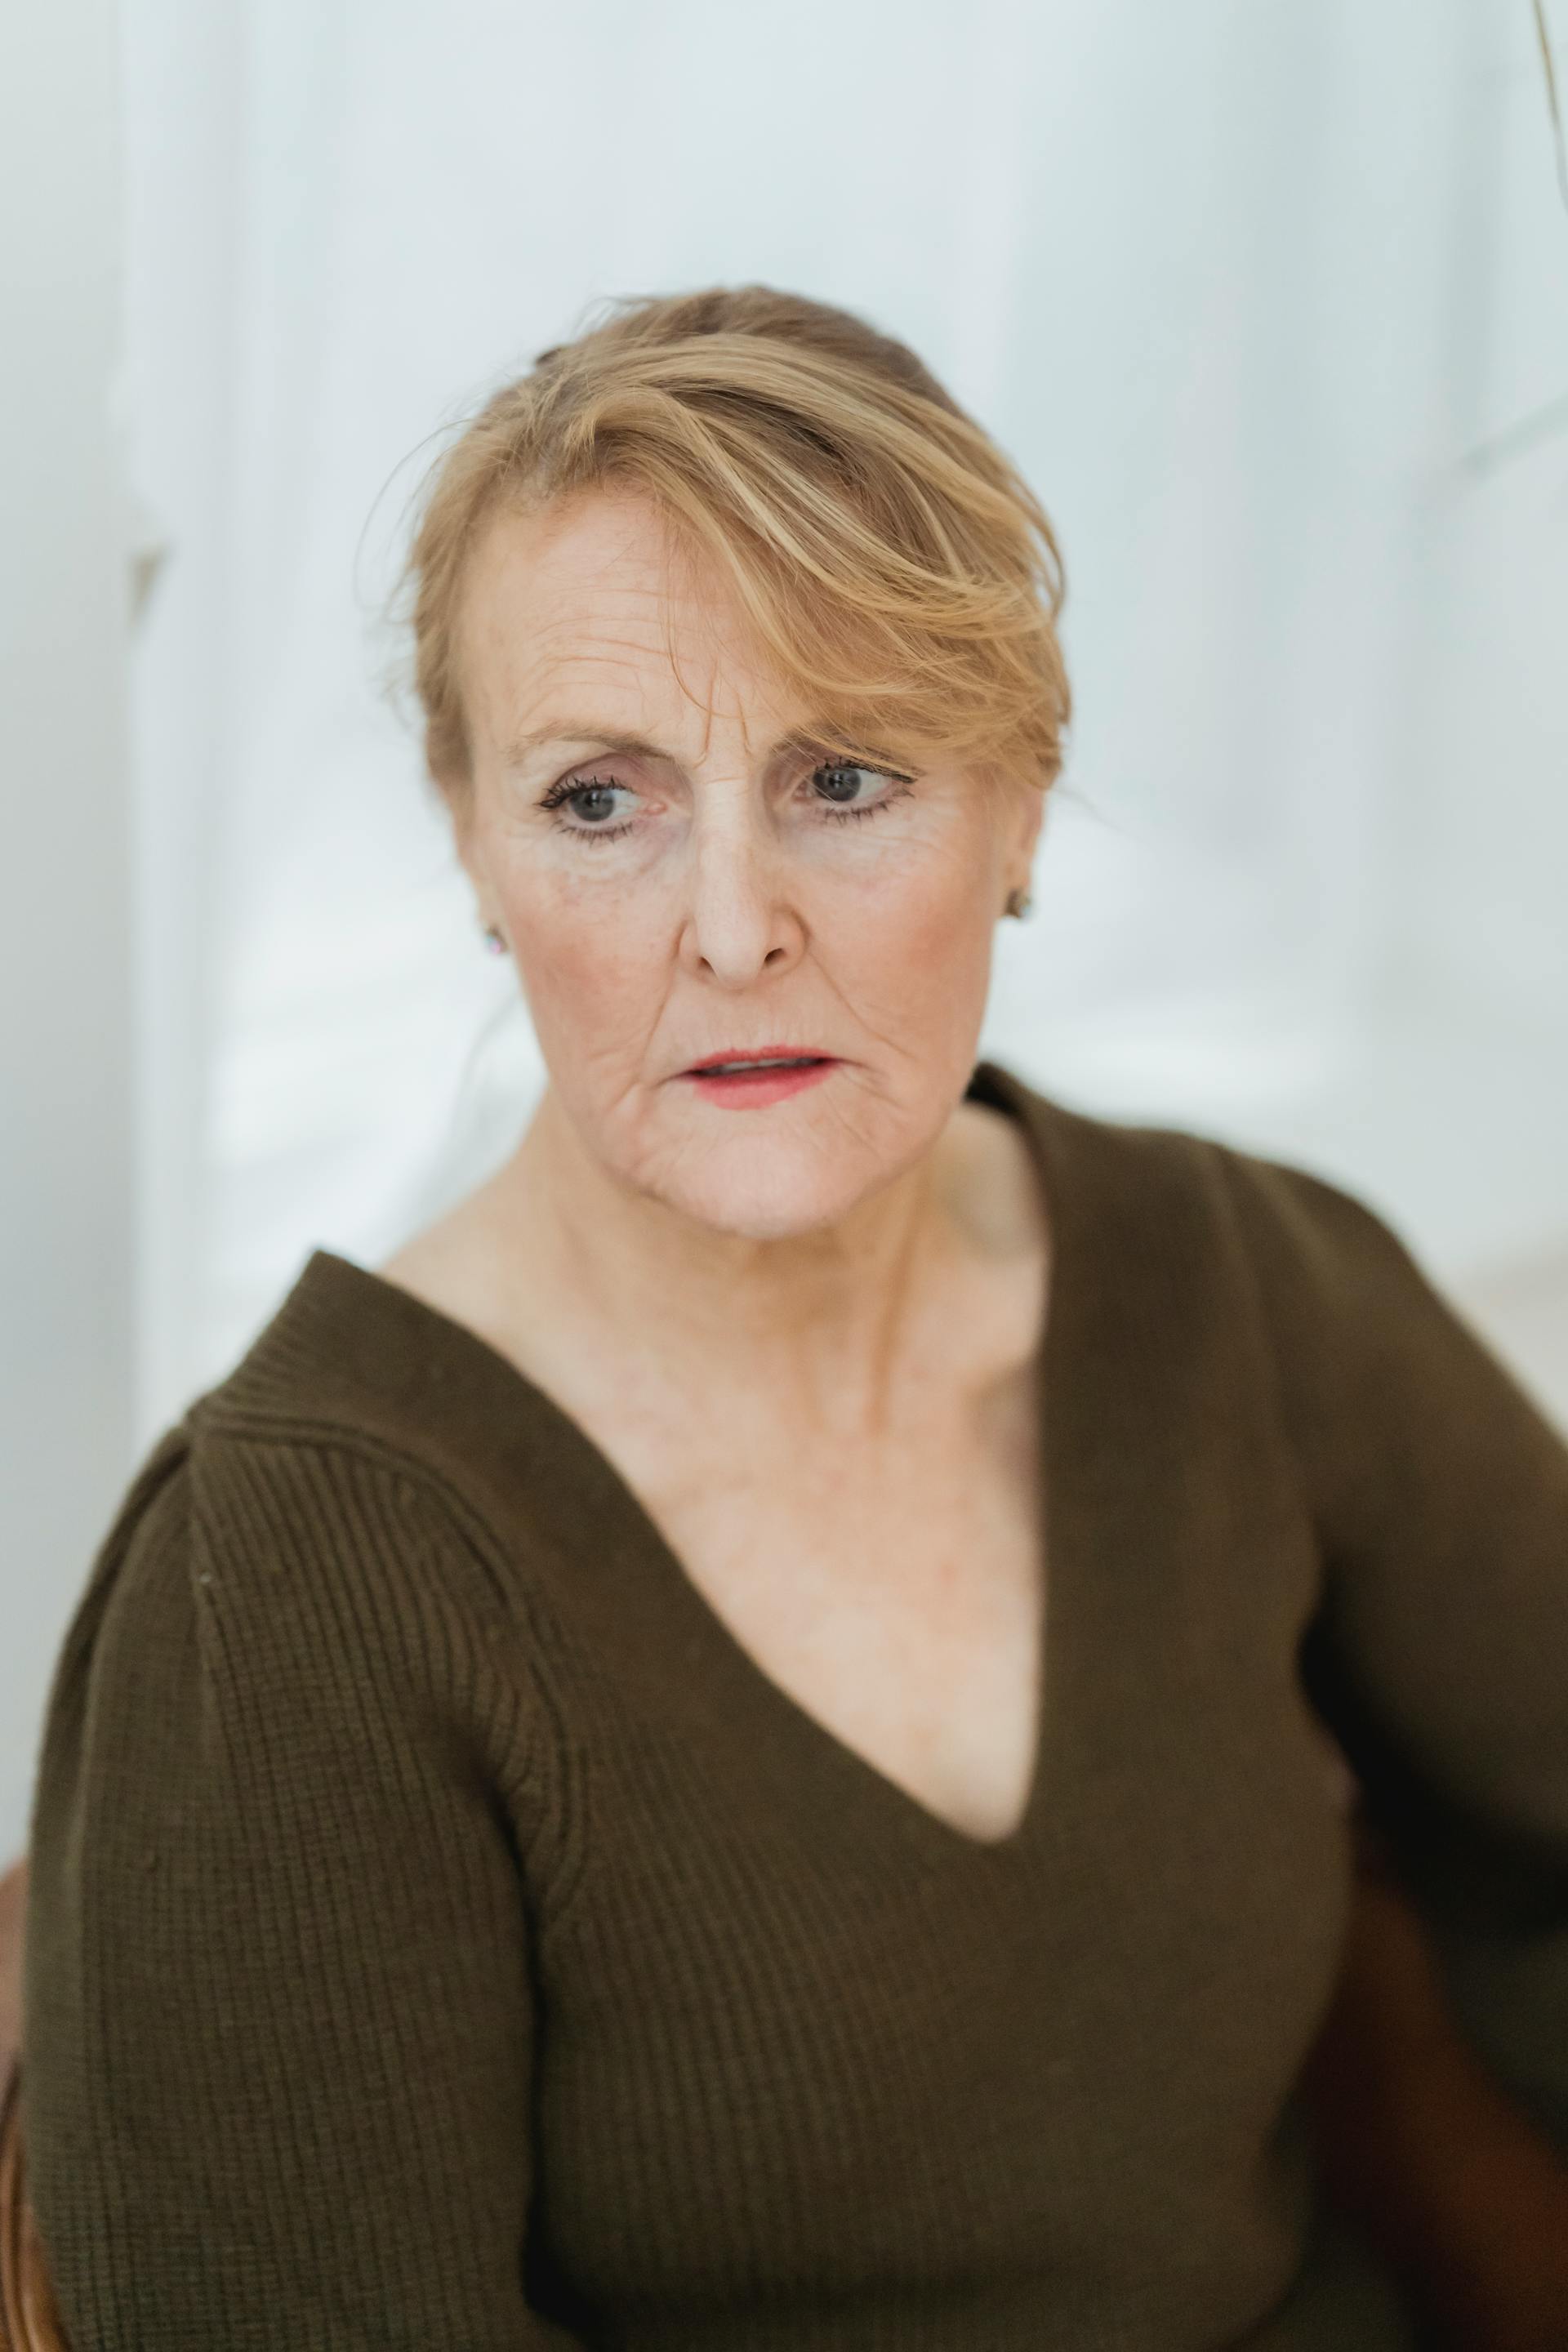 An angry and upset mature woman | Source: Pexels